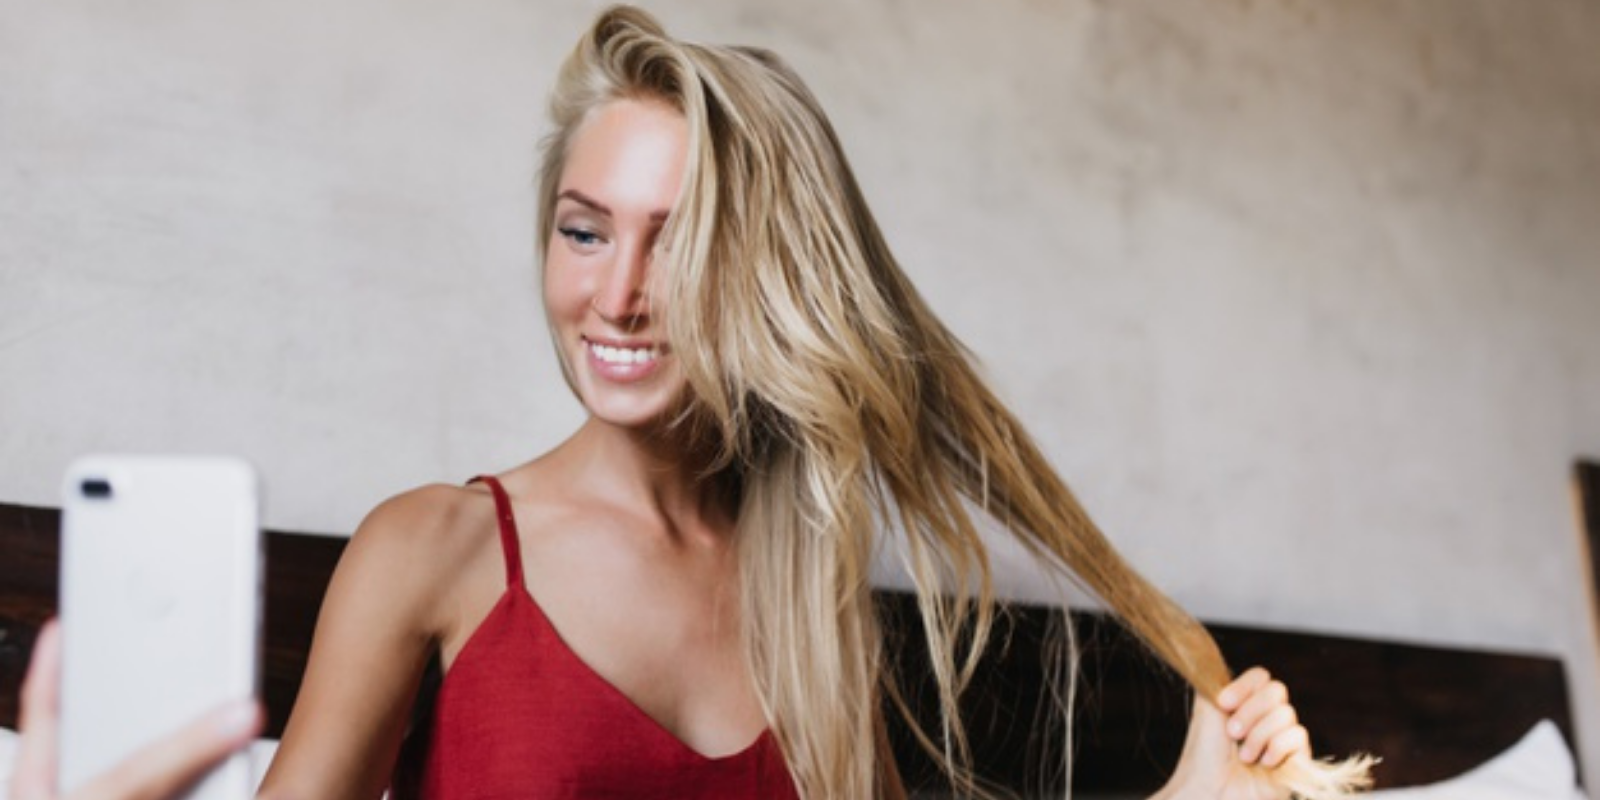 Blonde hair and straightening: what you need to know